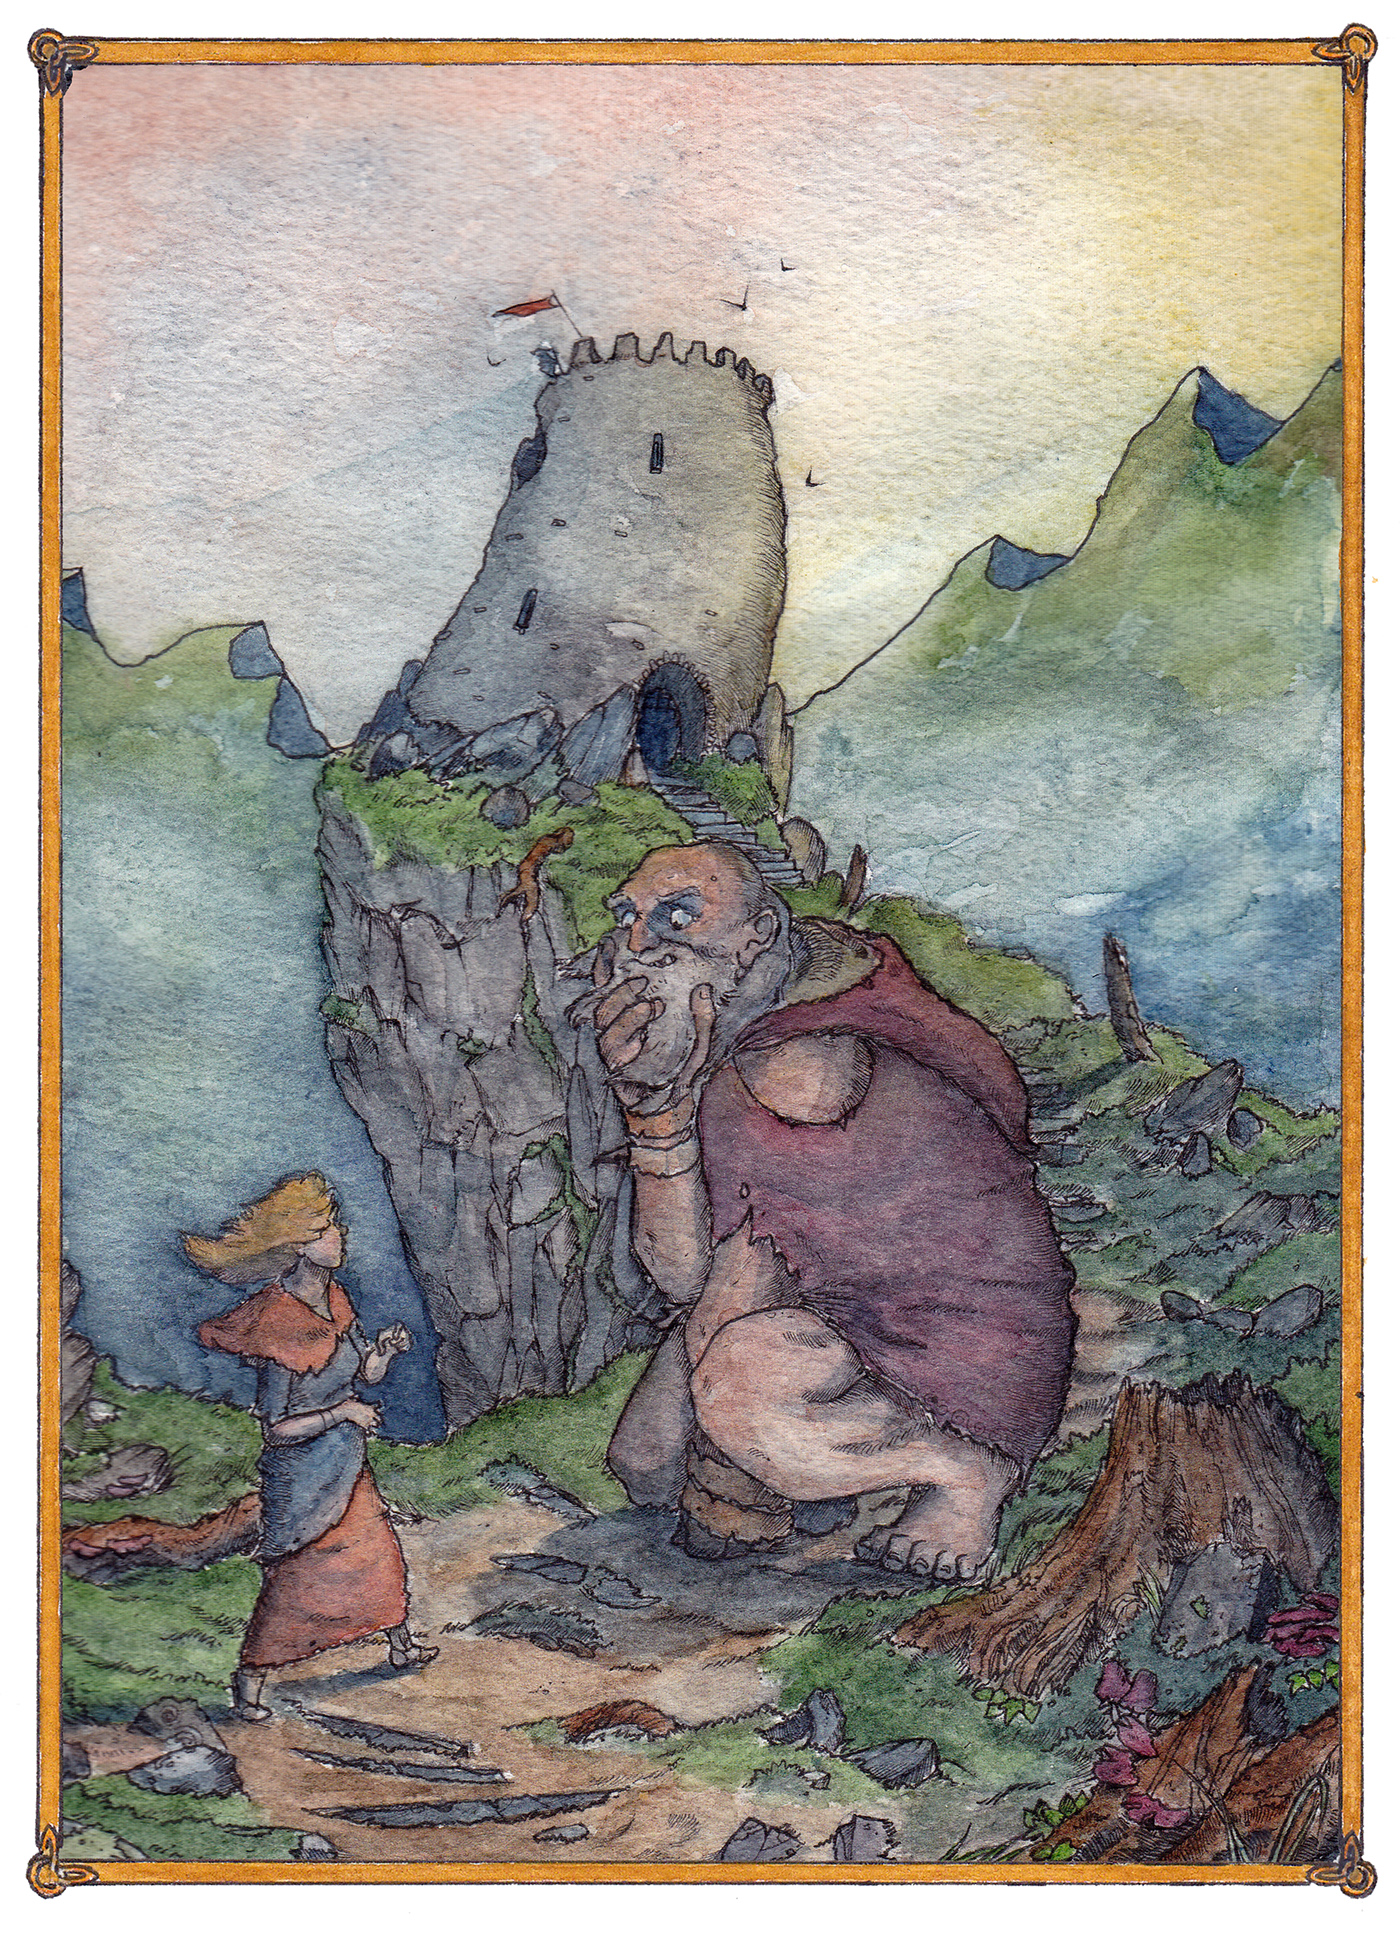 Magical Celtic TALES Stories Watercolours childrens books myth Folklore irish